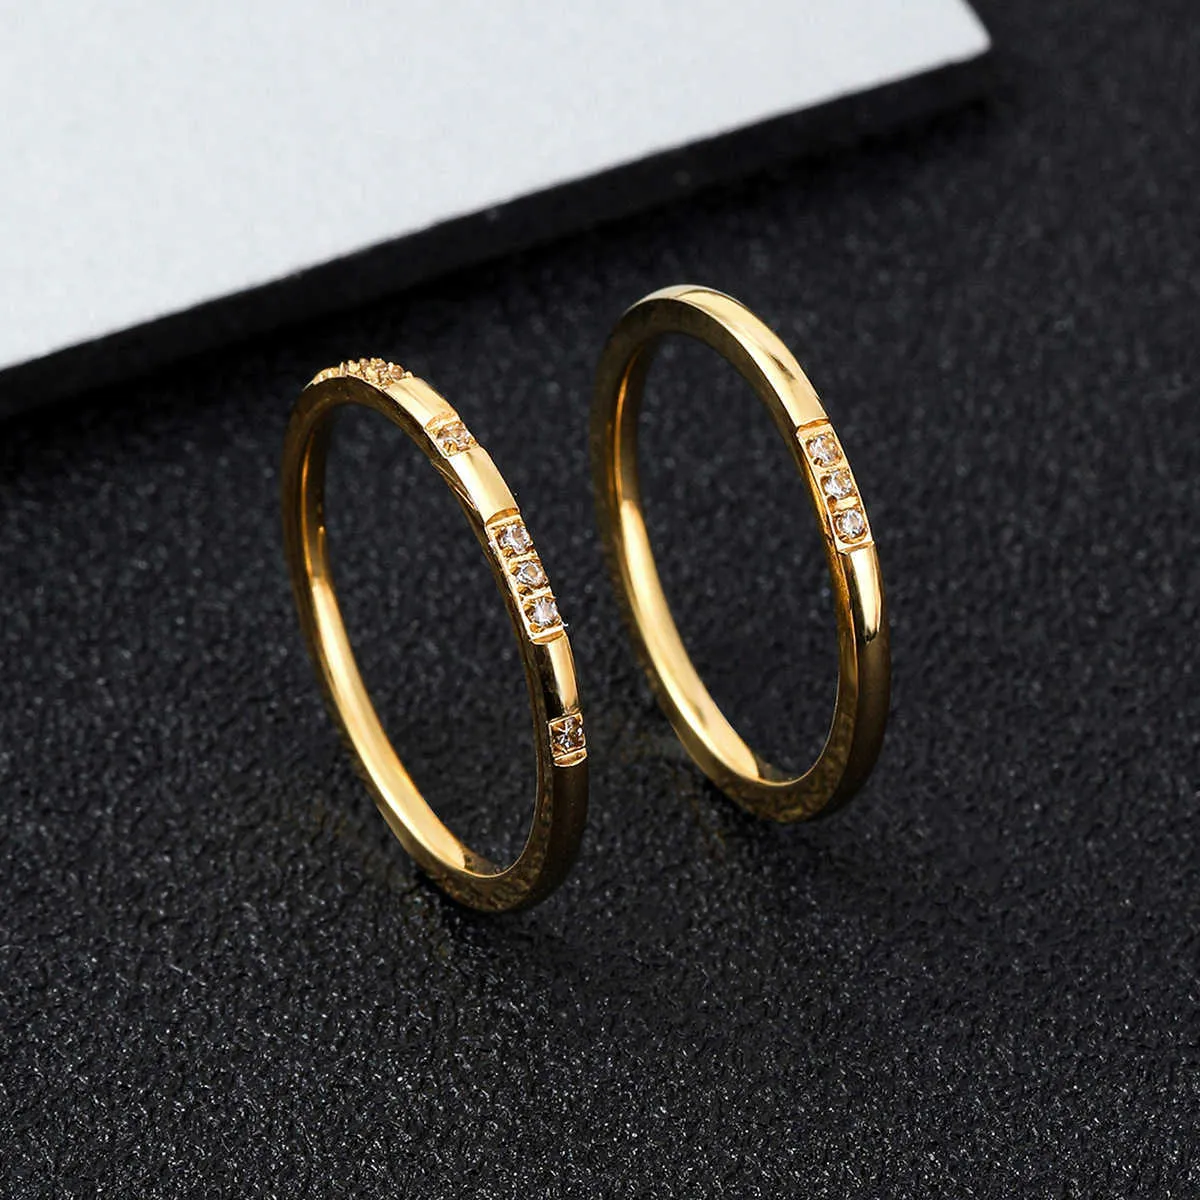 Band Rings Stainless Steel Dainty Thin Rings for Women 139 Pcs Zircon Stone Gold Color Finger Accessories Gift Jewelry Wholesale KBR135 Z0428